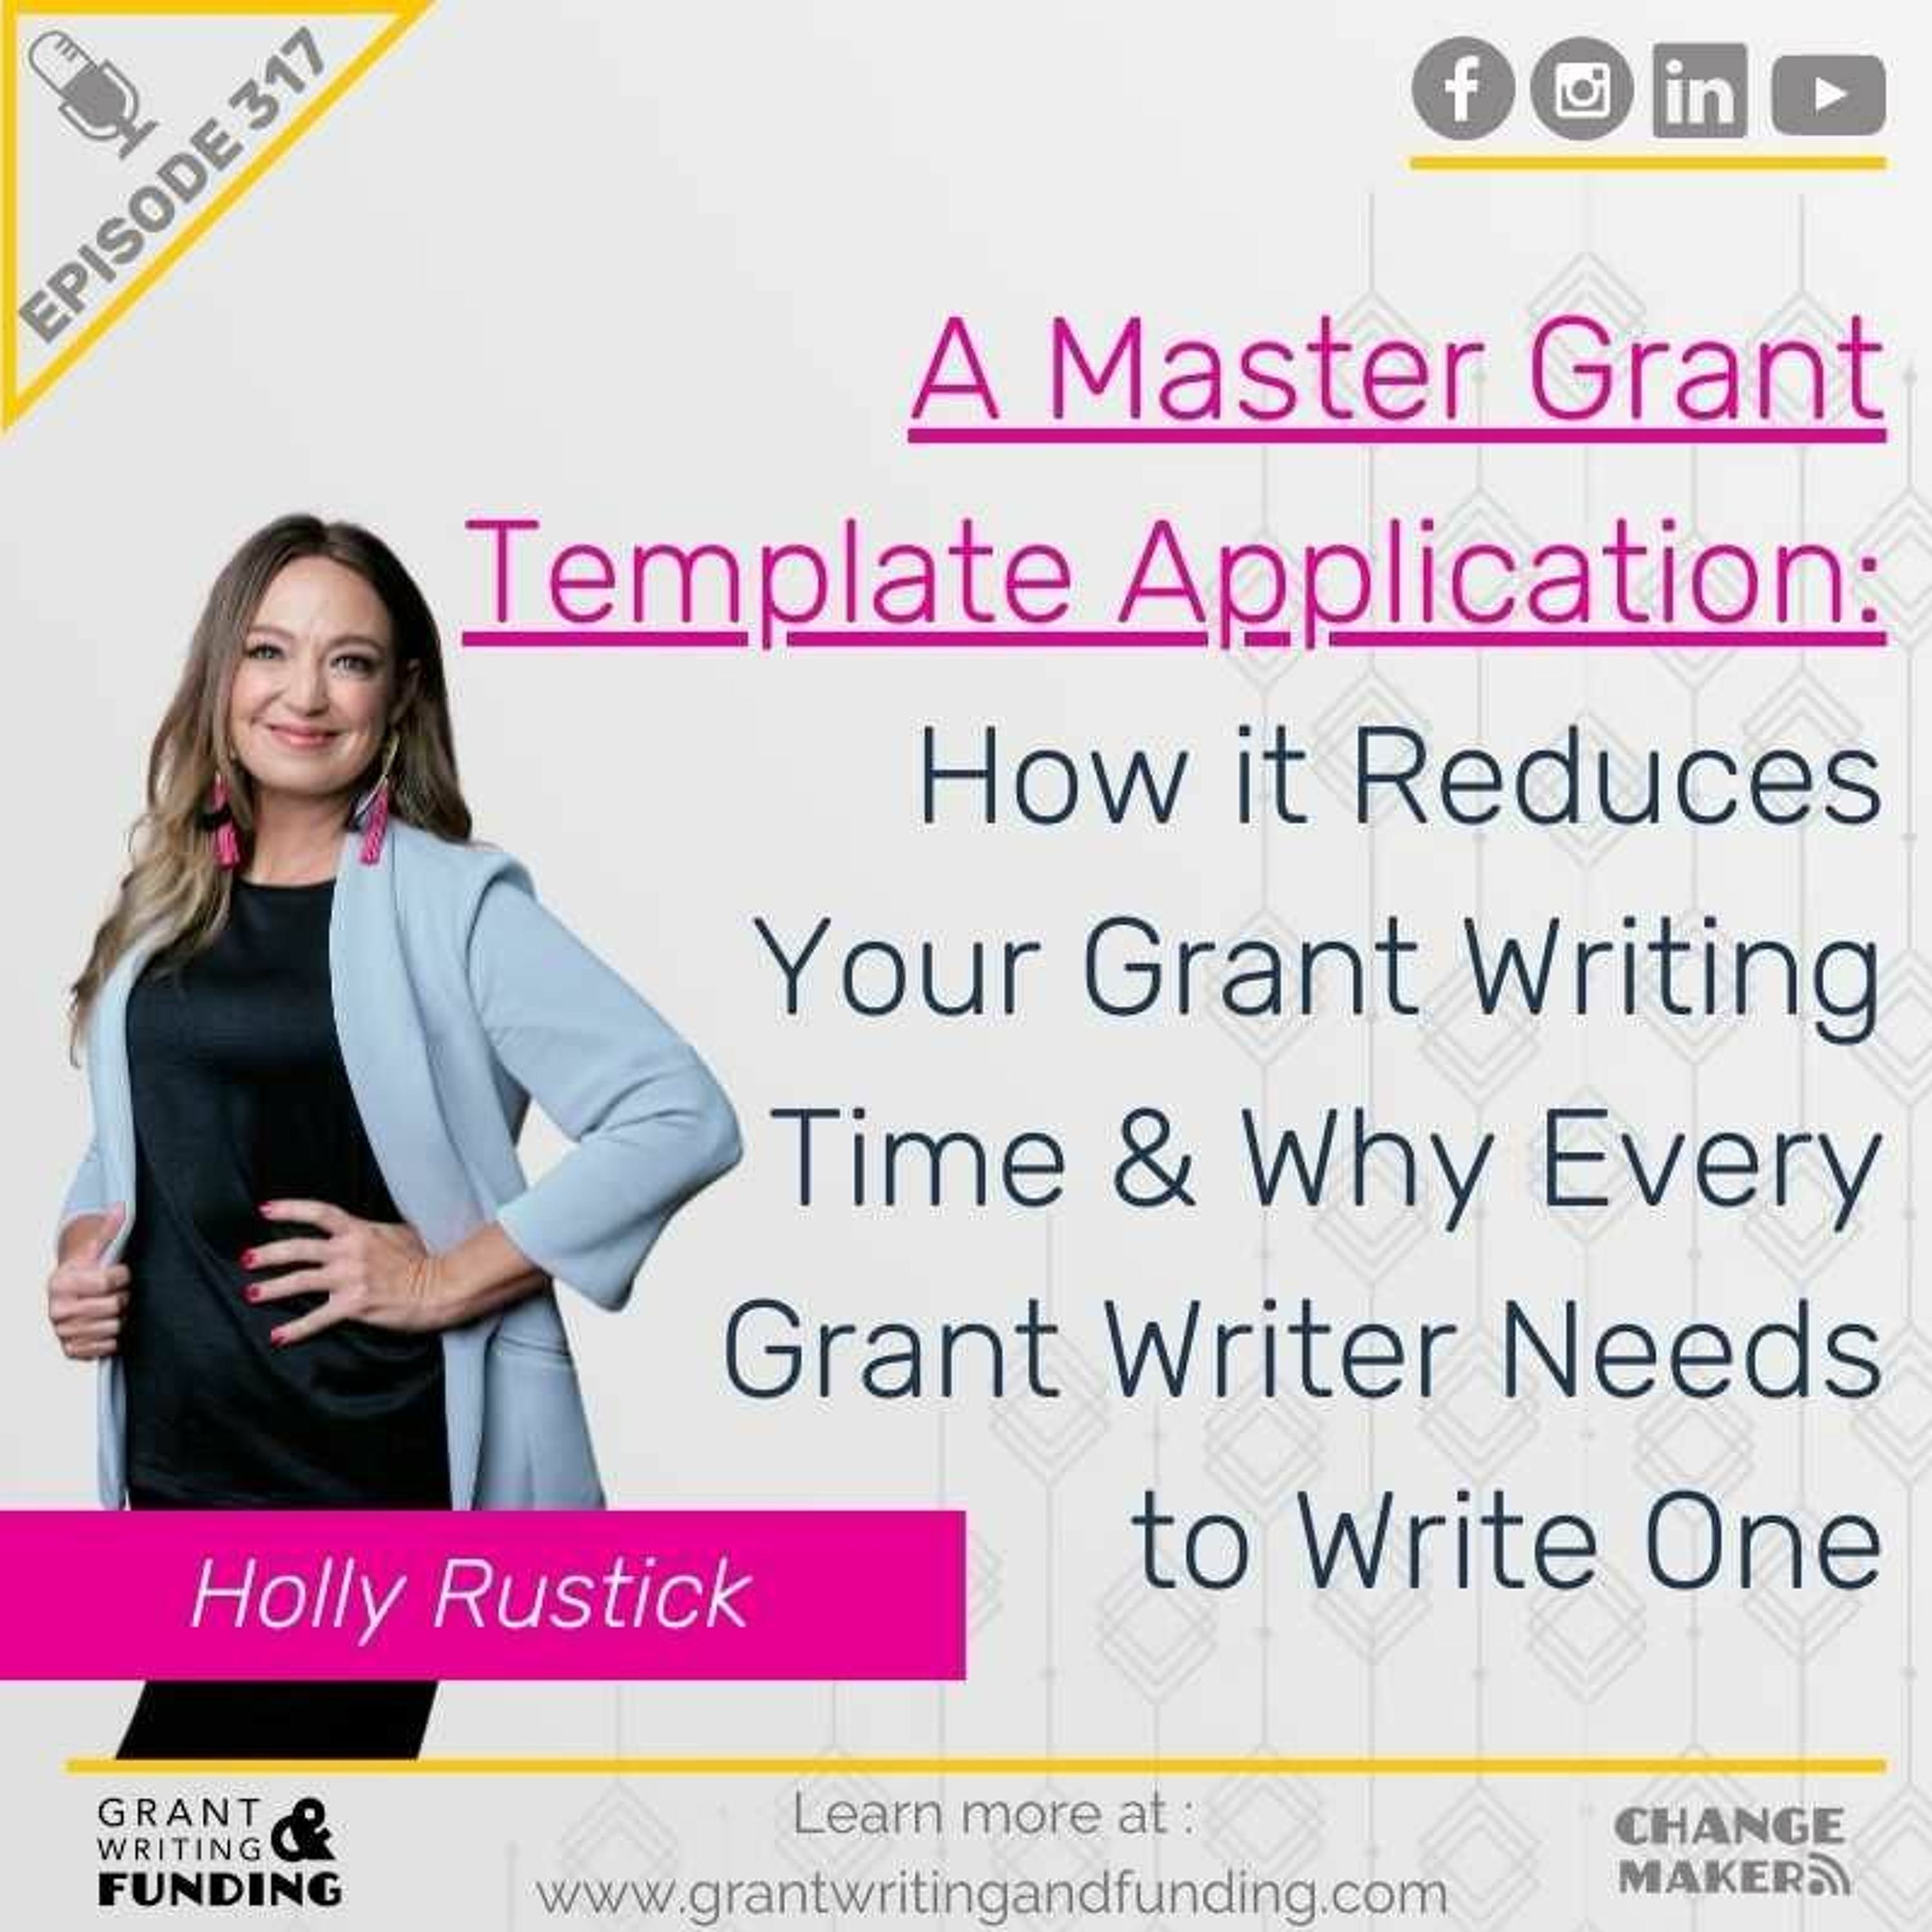 Ep. 317: A Master Grant Template Application: How it Reduces Your Grant Writing Time